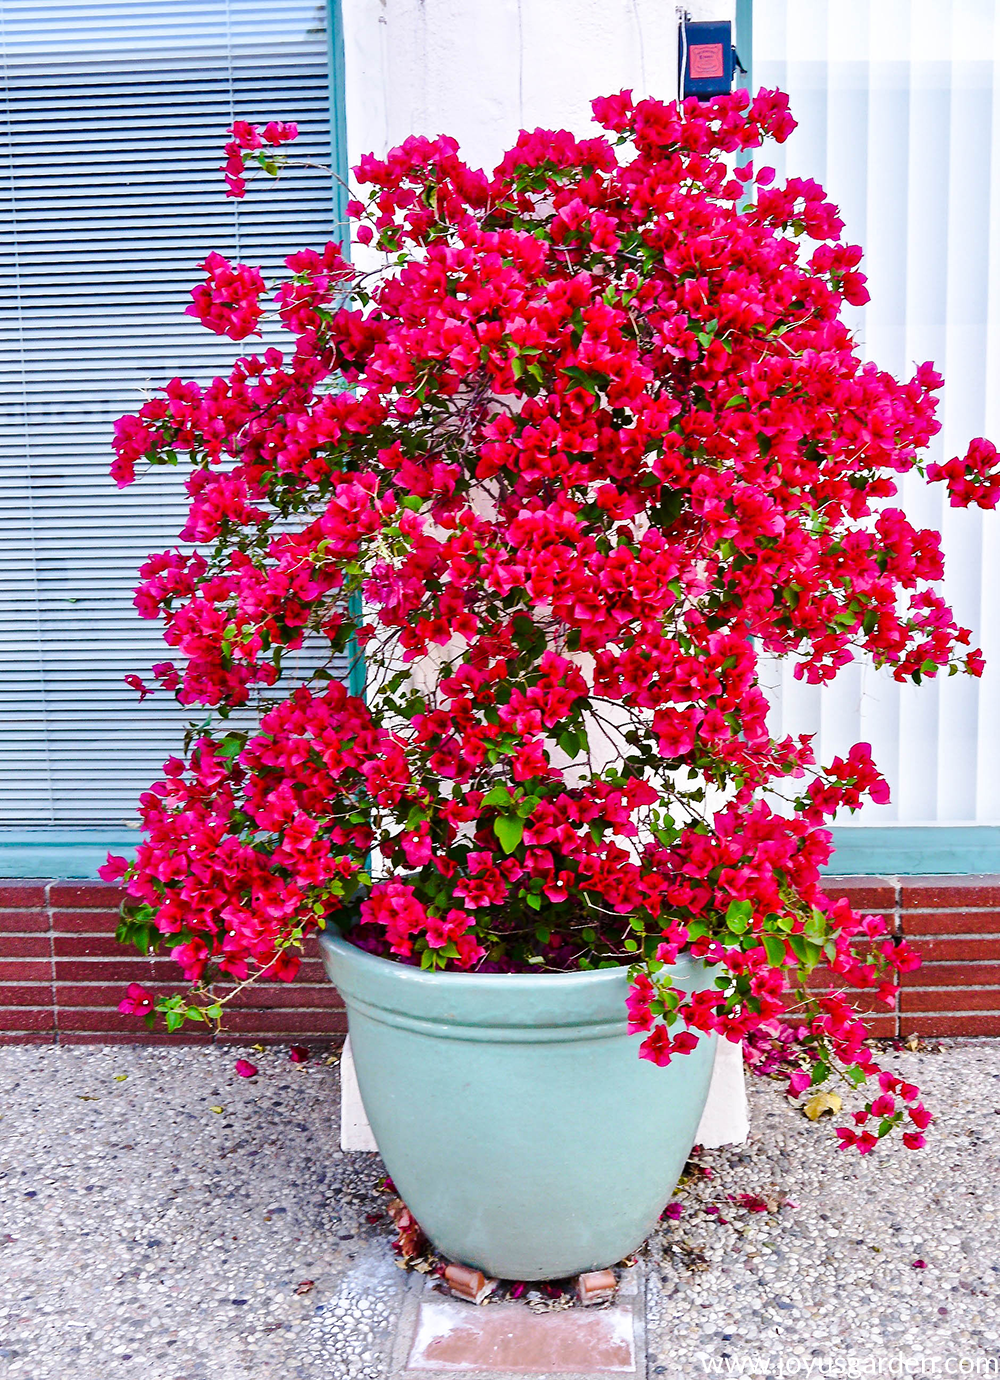 a beautiful rose-red bougainvillea in full bloom grows in a light blue ceramic container